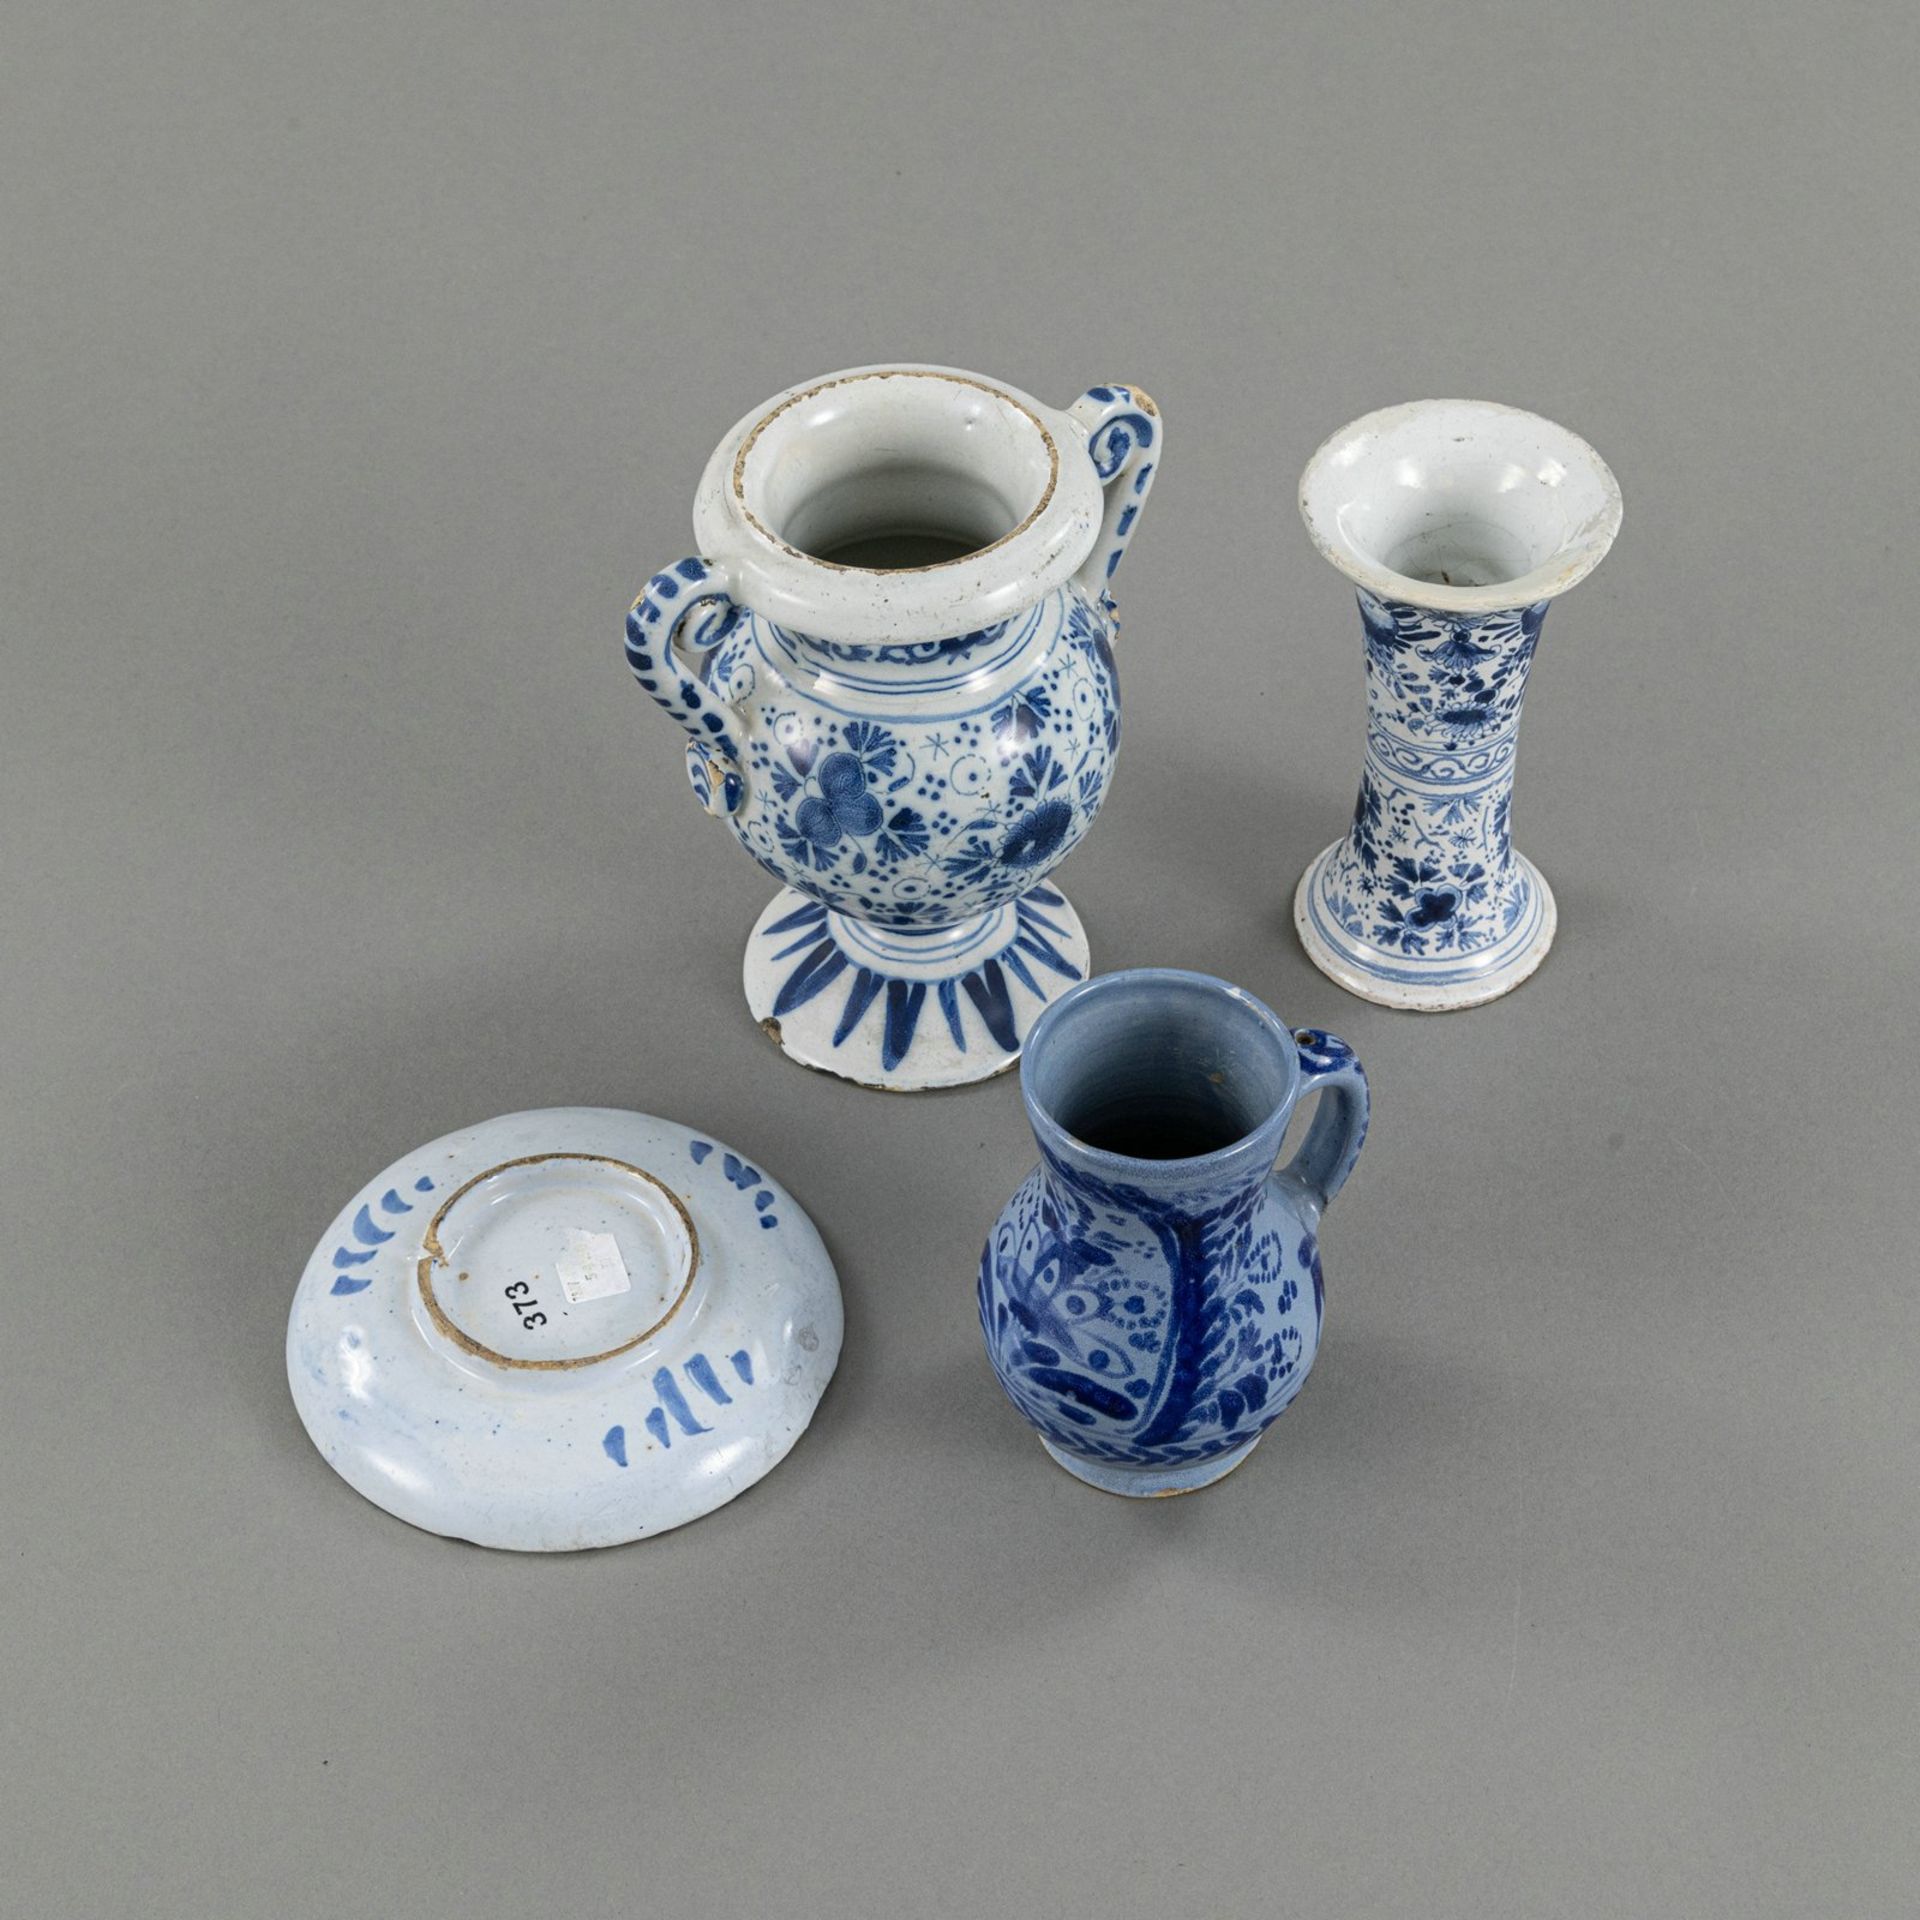 TWO VASES, A SMALL PLATE AND A SMALL JAR - Image 4 of 5